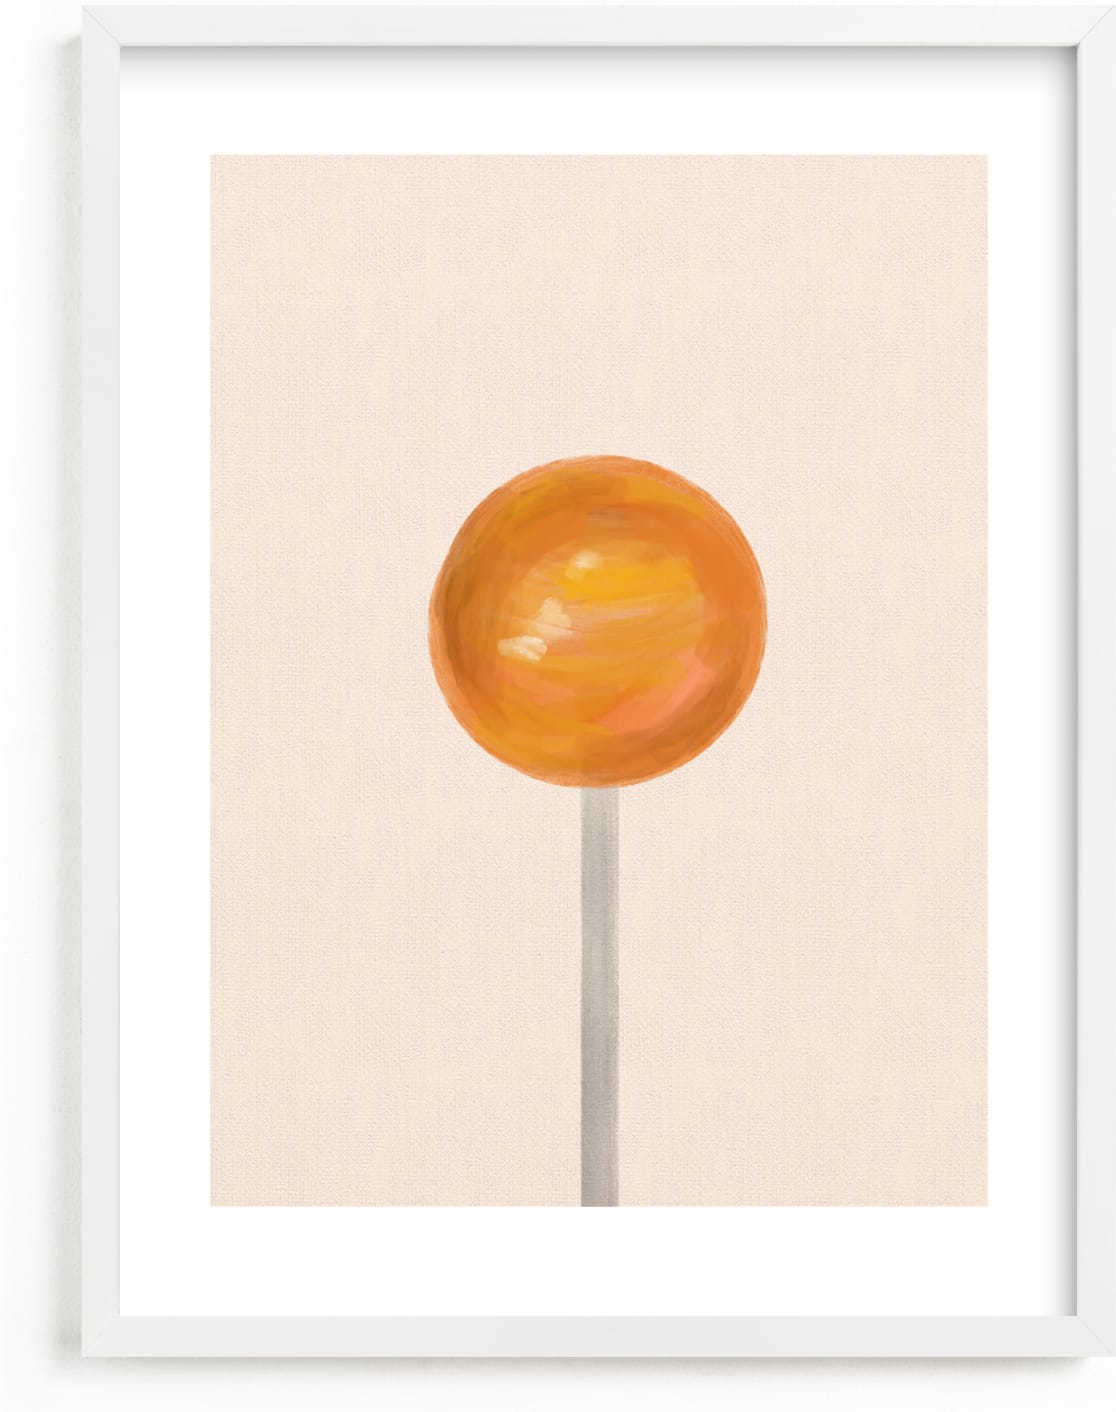 This is a orange kids wall art by Maja Cunningham called Lolli Pop.